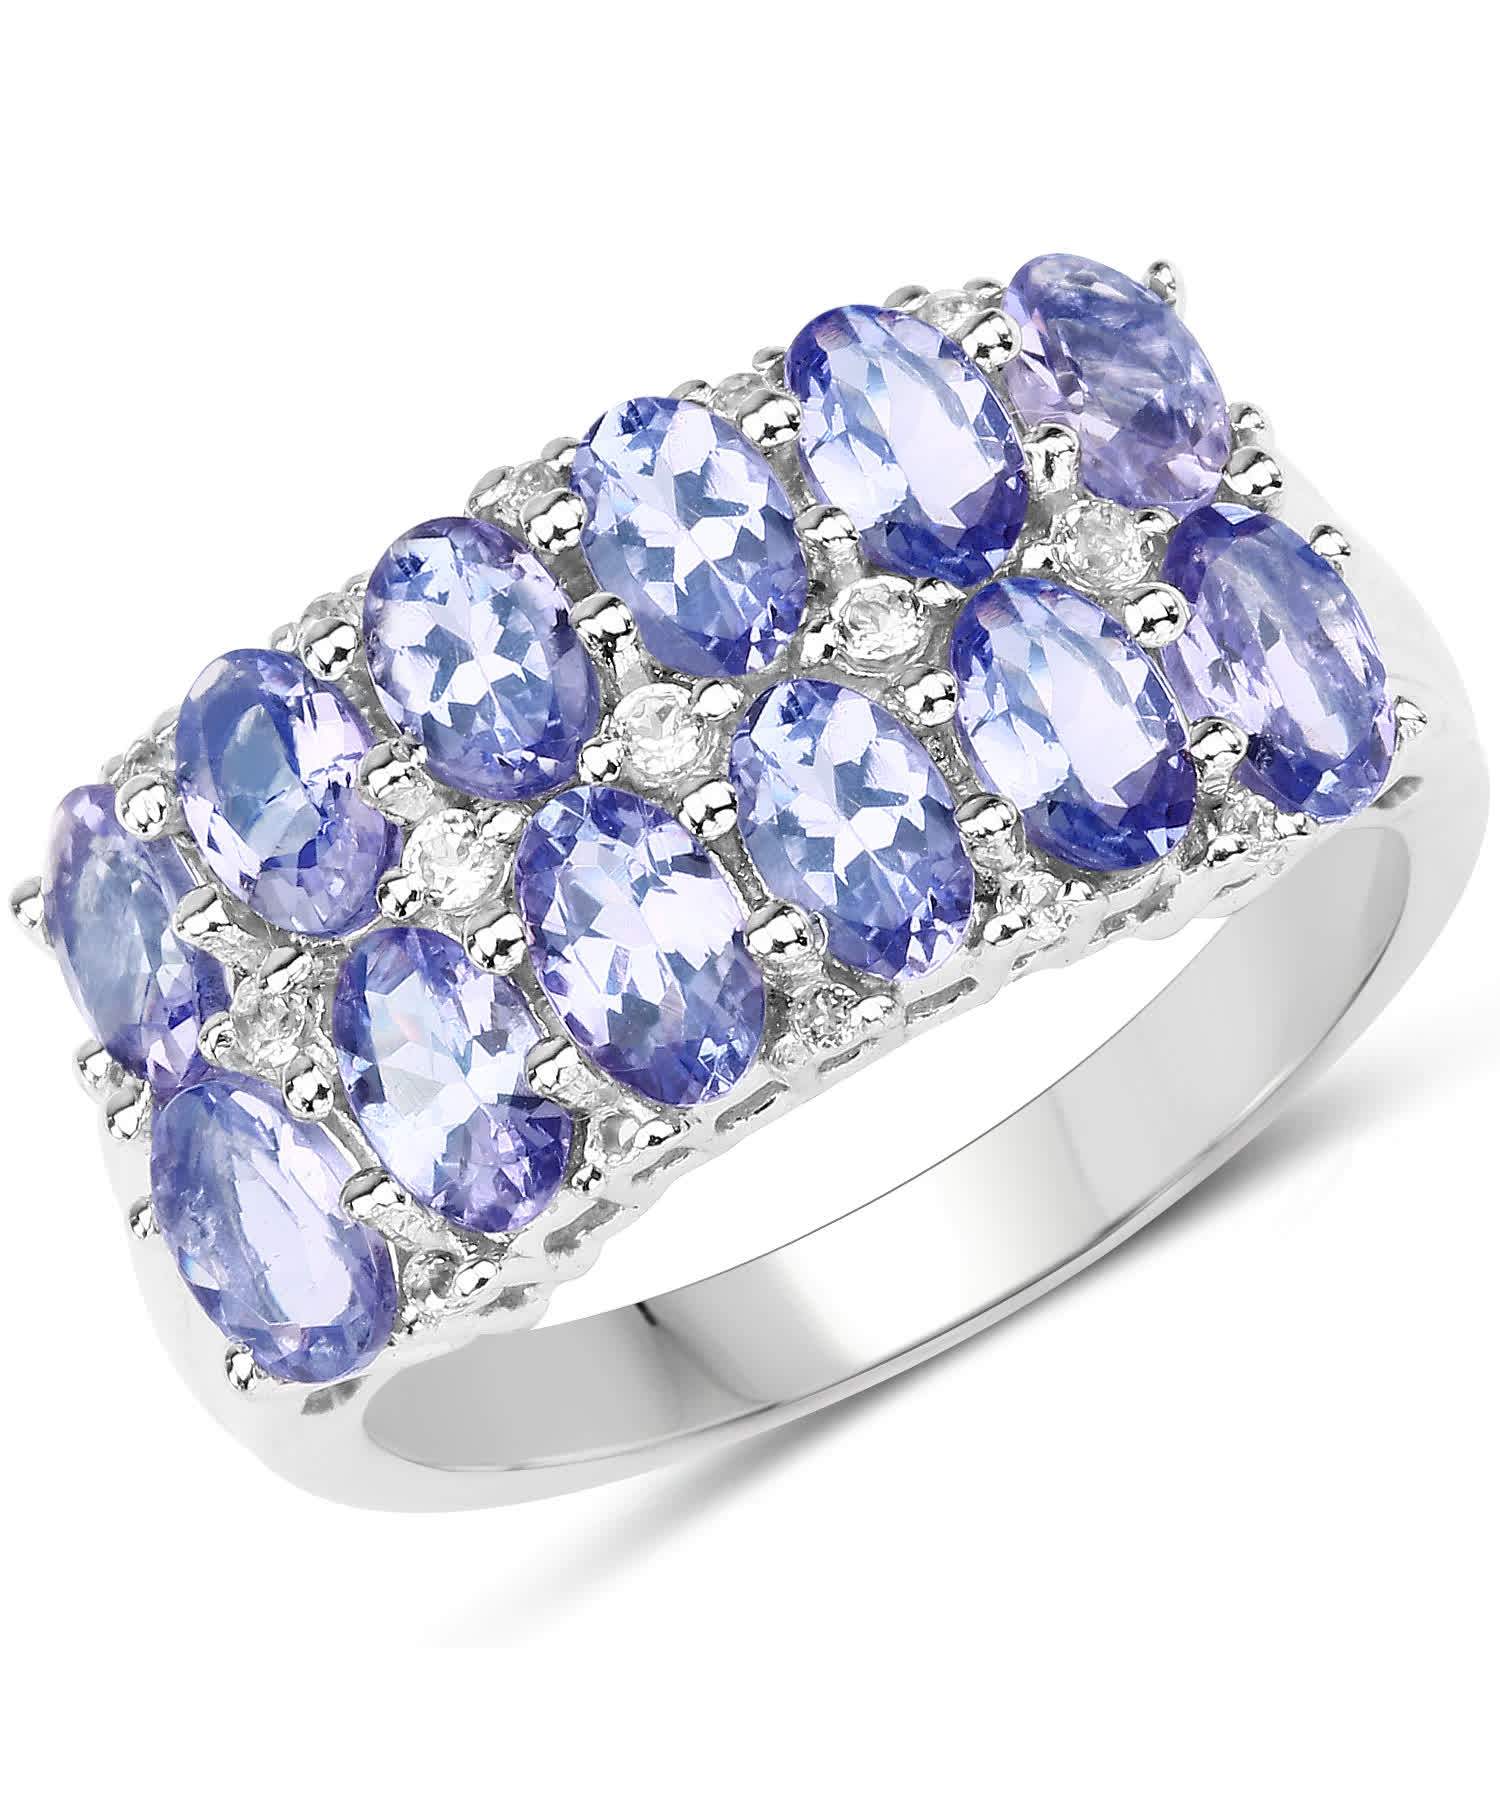 3.16ctw Natural Tanzanite and Topaz Rhodium Plated 925 Sterling Silver Right Hand Ring View 1